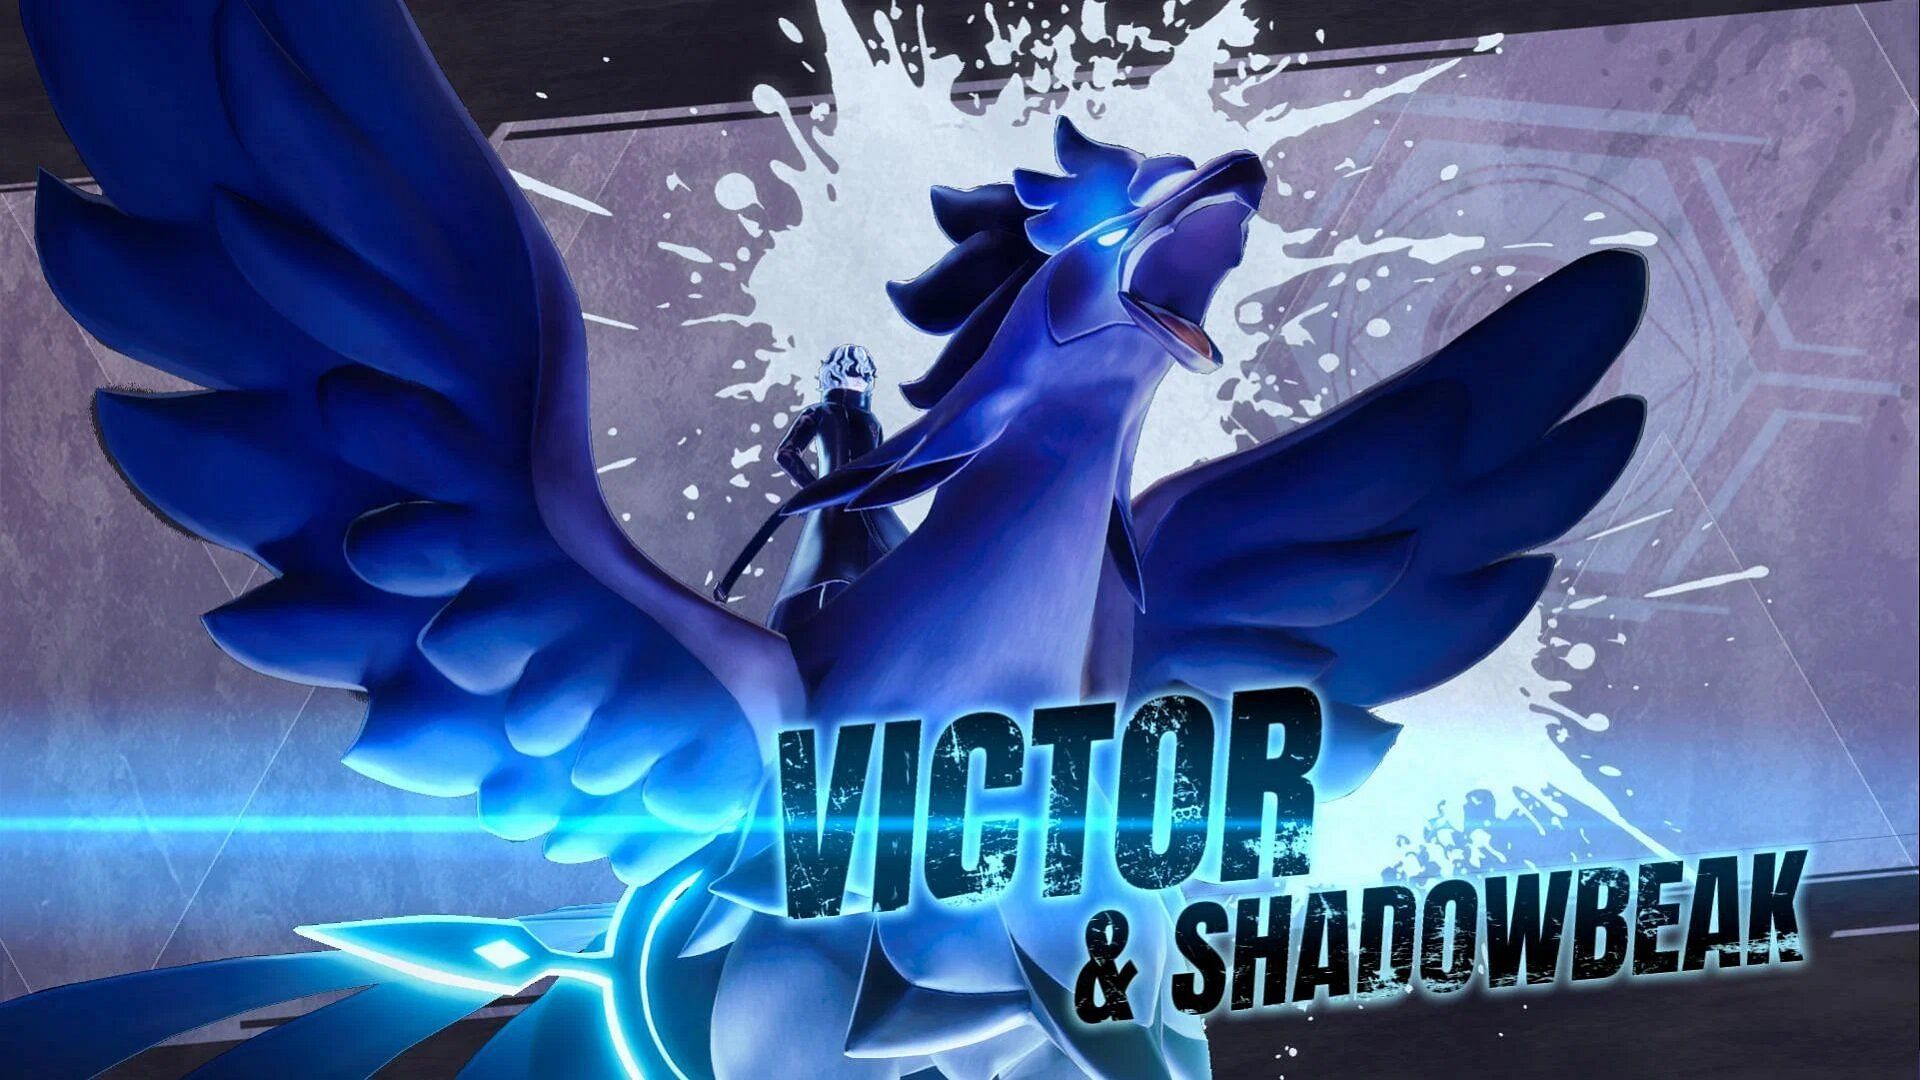 How to catch all Tower Bosses: Victor and Shadowbeak (Image via Pocket Pair)